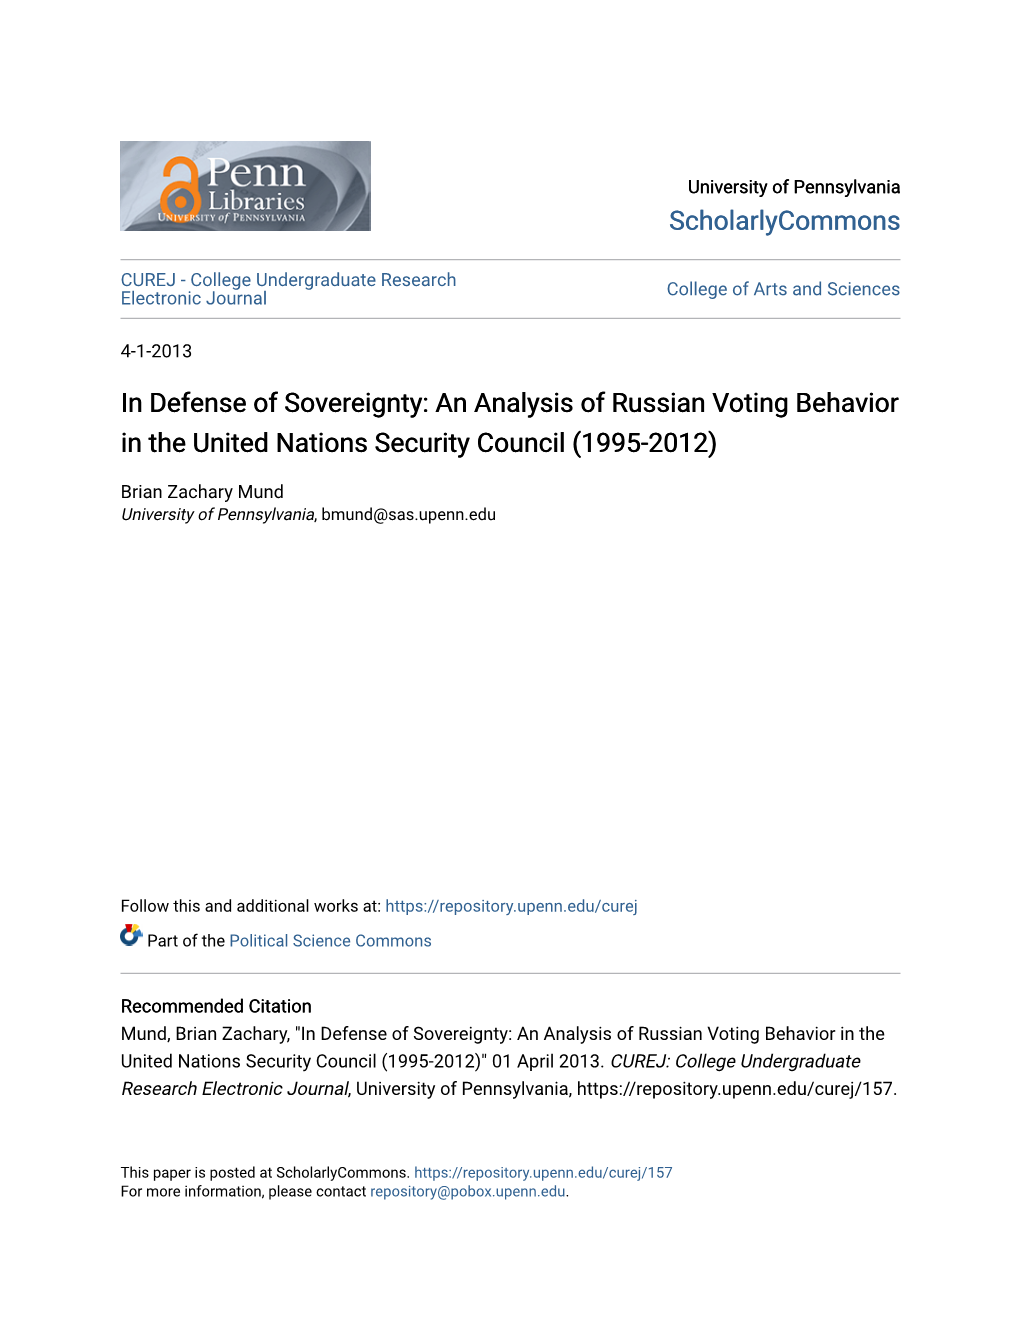 An Analysis of Russian Voting Behavior in the United Nations Security Council (1995-2012)